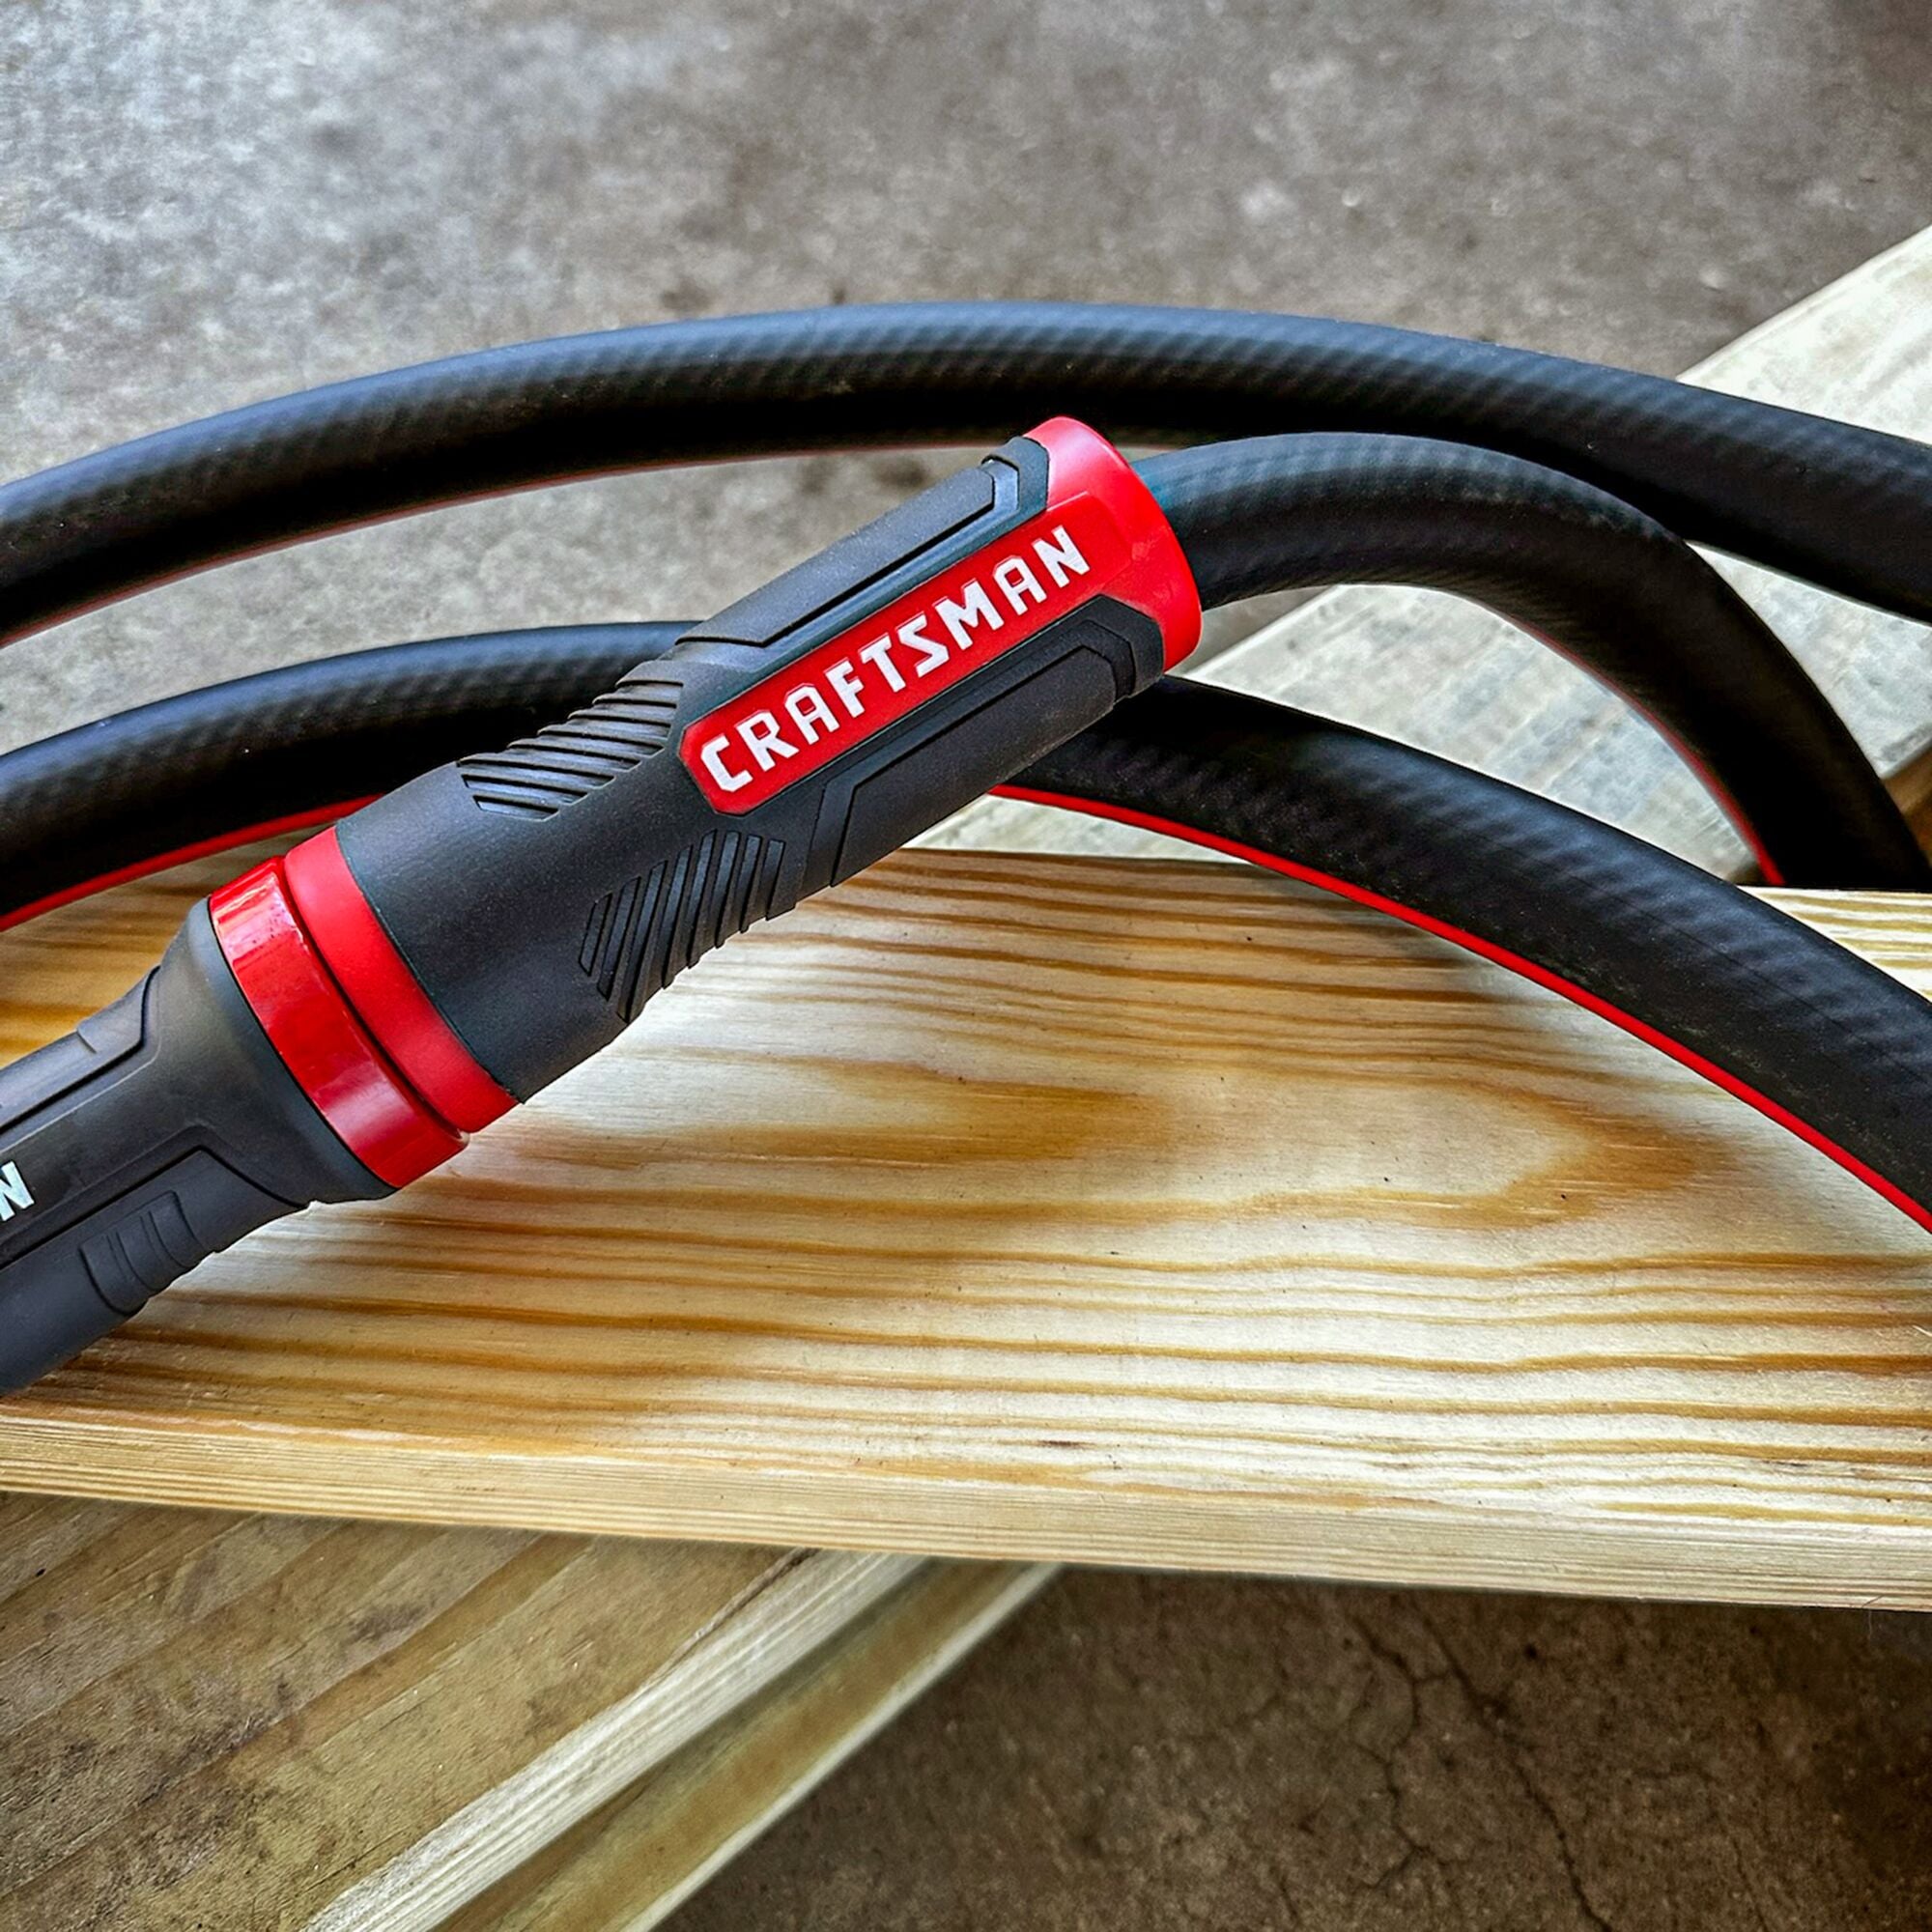 Craftsman black and red professional-grade water hose featuring its easy grip female end coupling.  